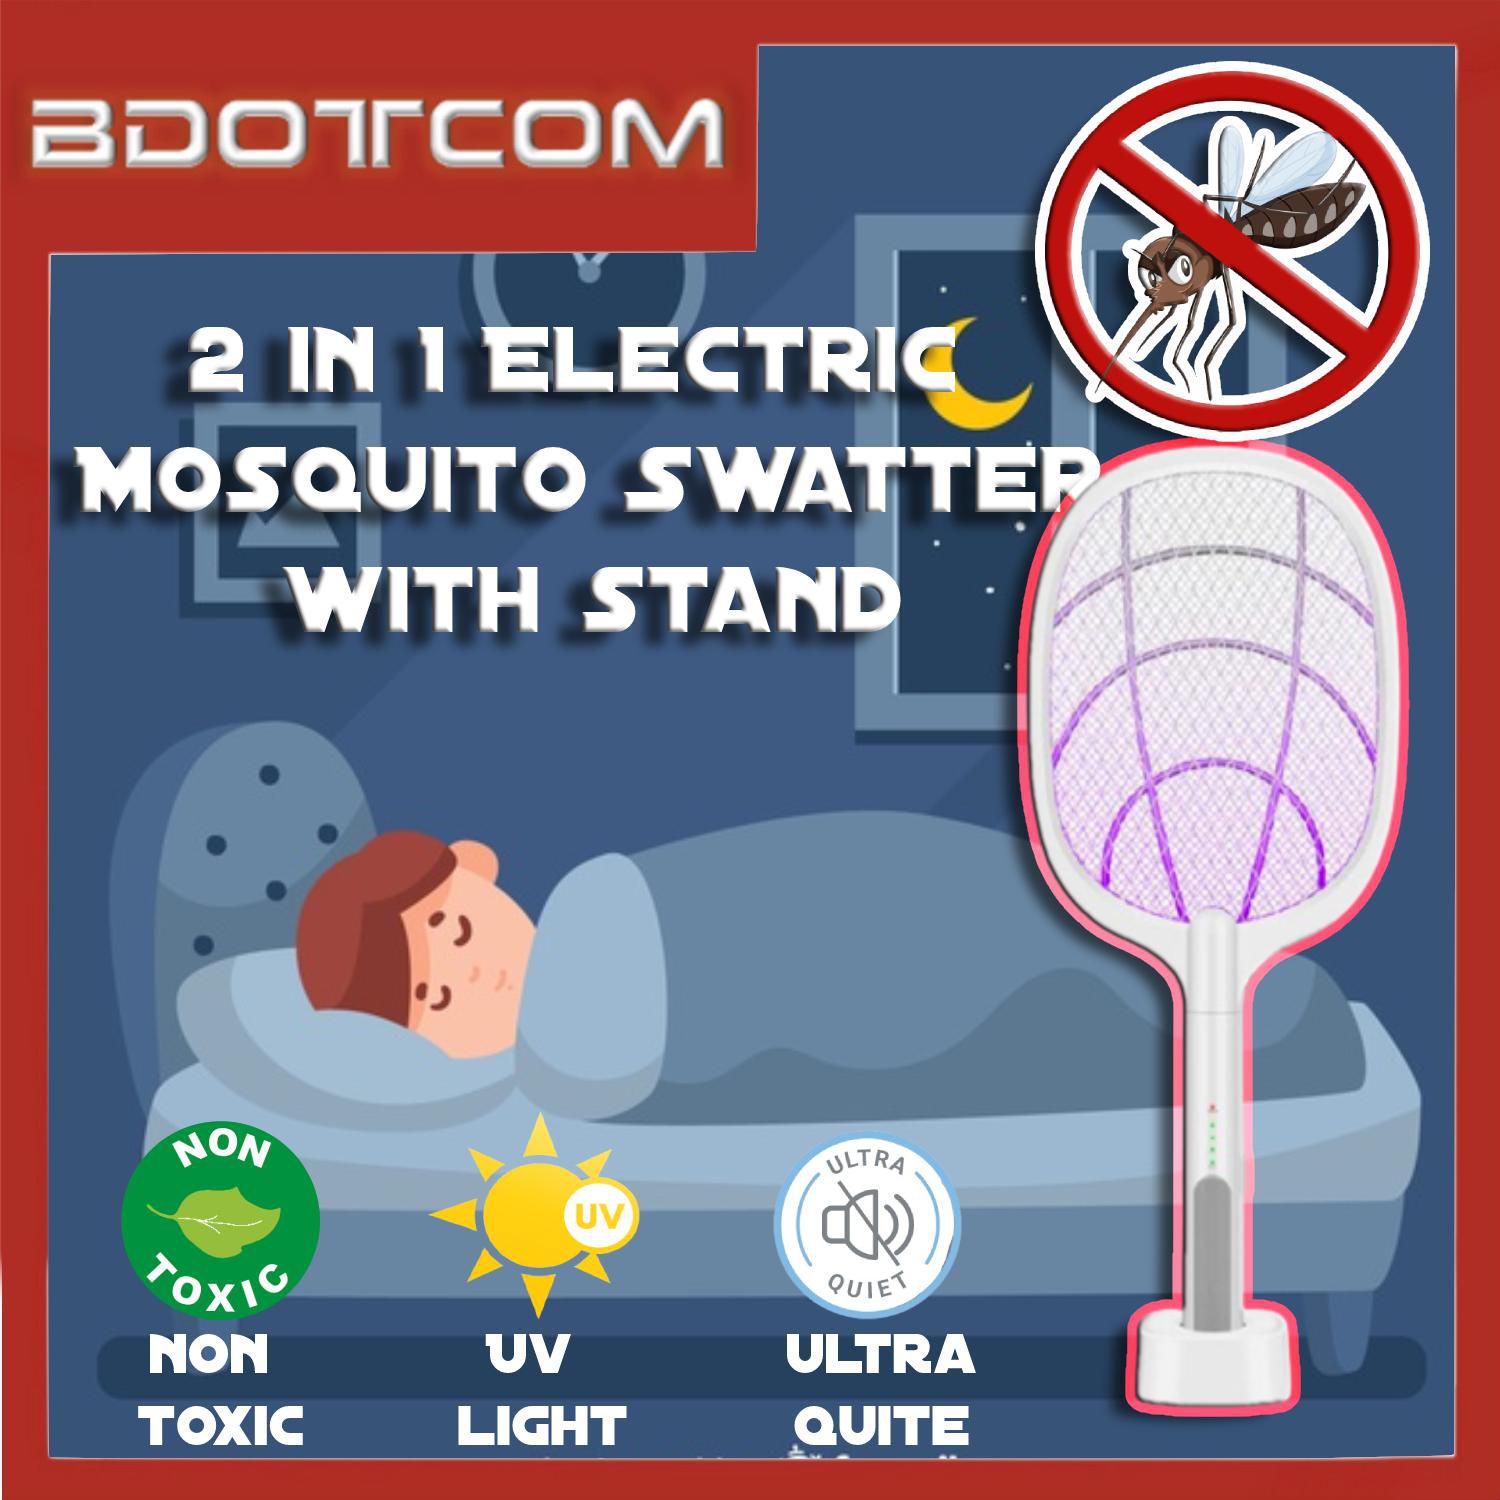 Bdotcom [Ready Stock] 2 in 1 Electric Mosquito Killer Swatter with Stand